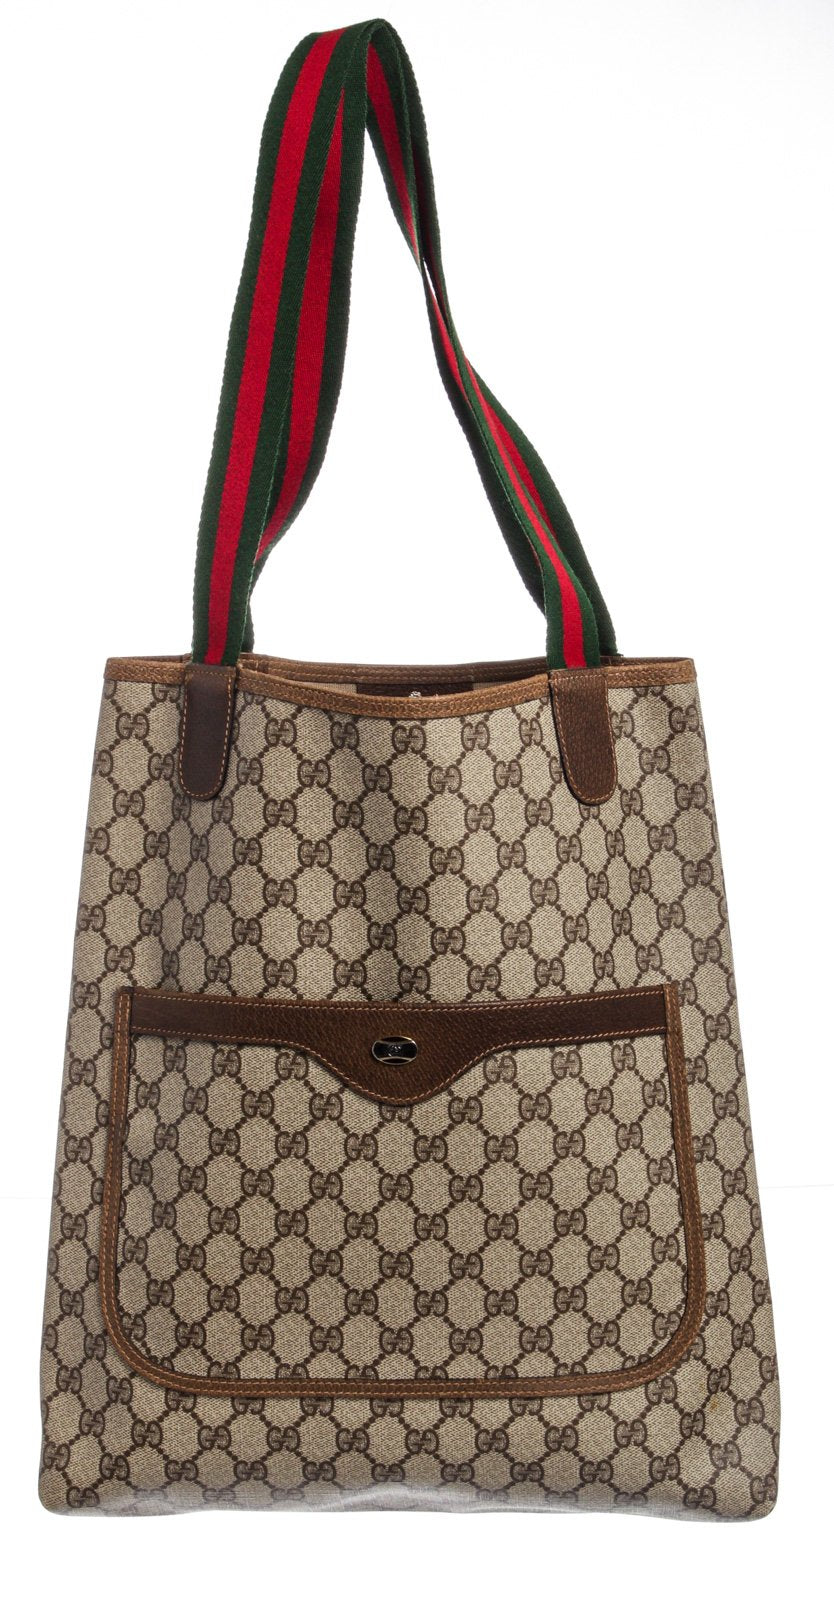 12 rare vintage Gucci bags to invest in now and love forever